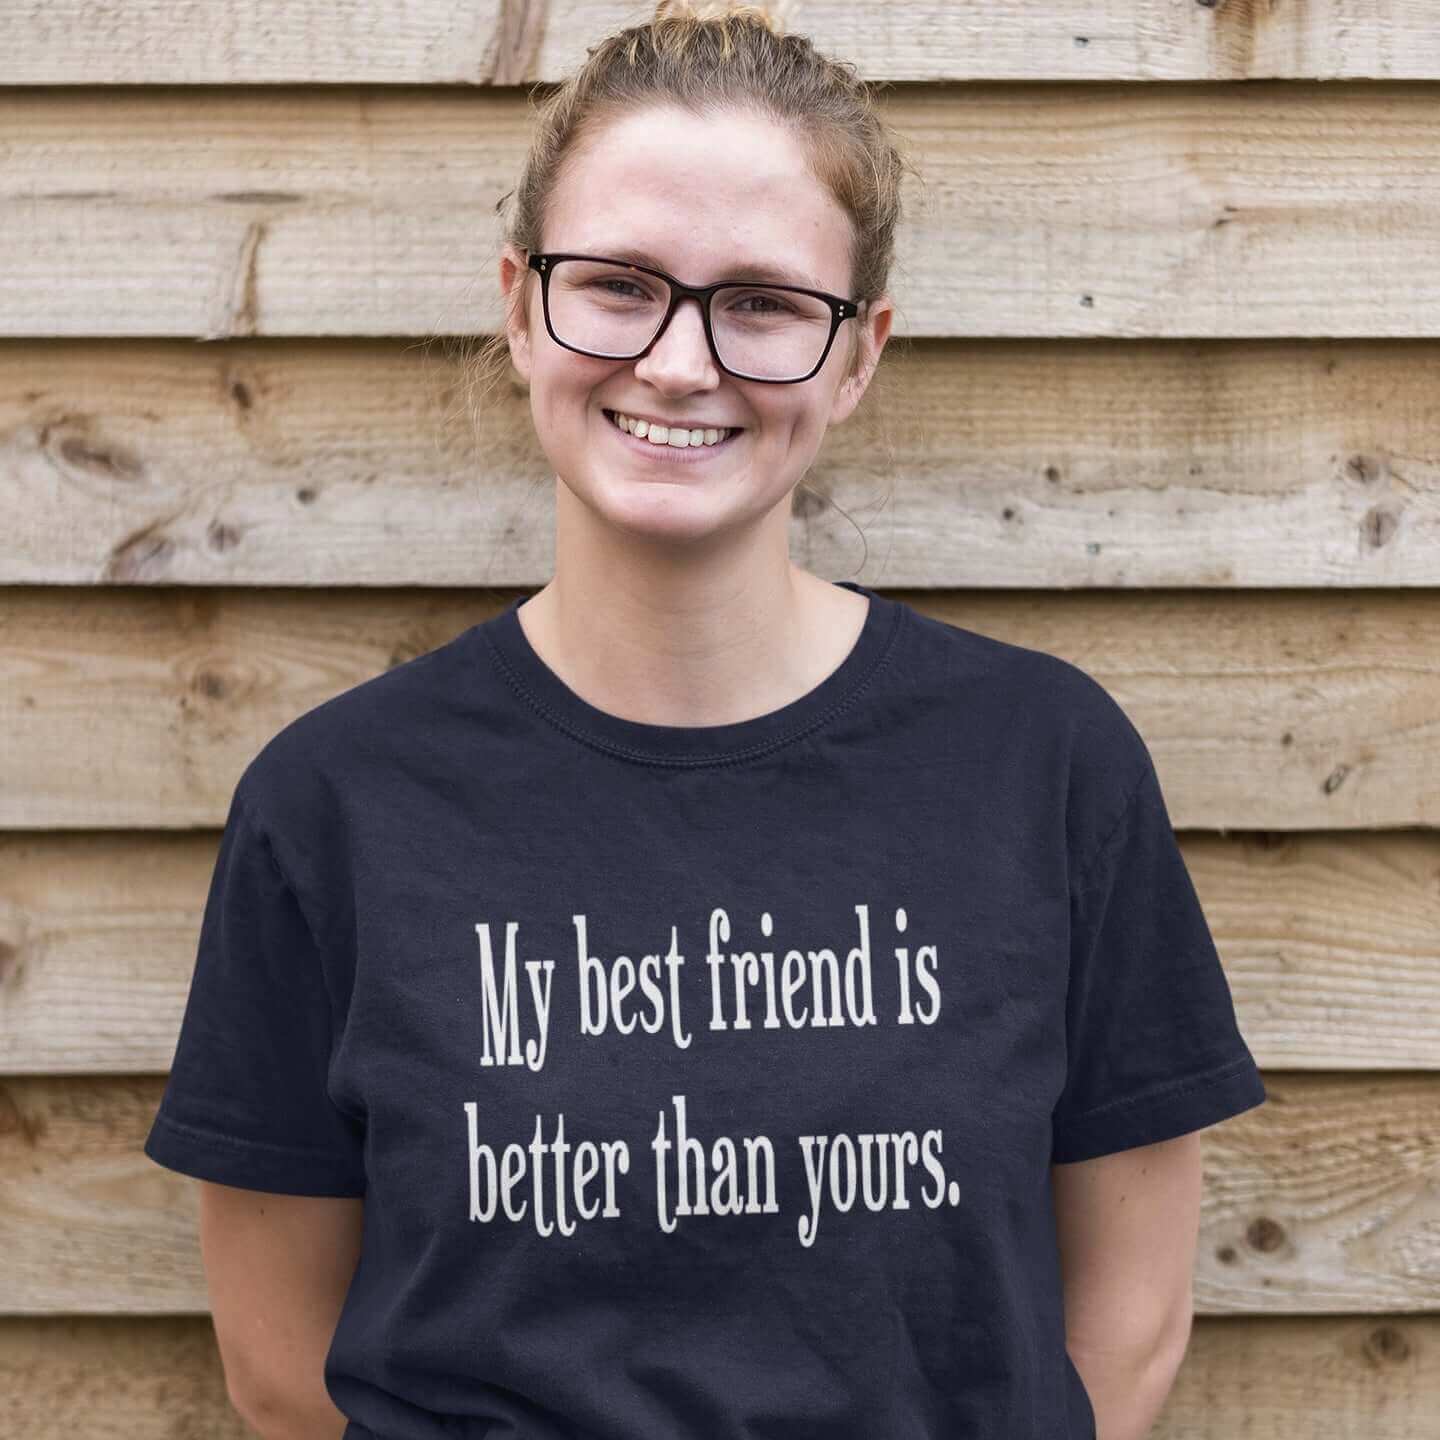 Smiling woman wearing a navy blue t-shirt with the phrase My best friend is better than yours printed on the front.